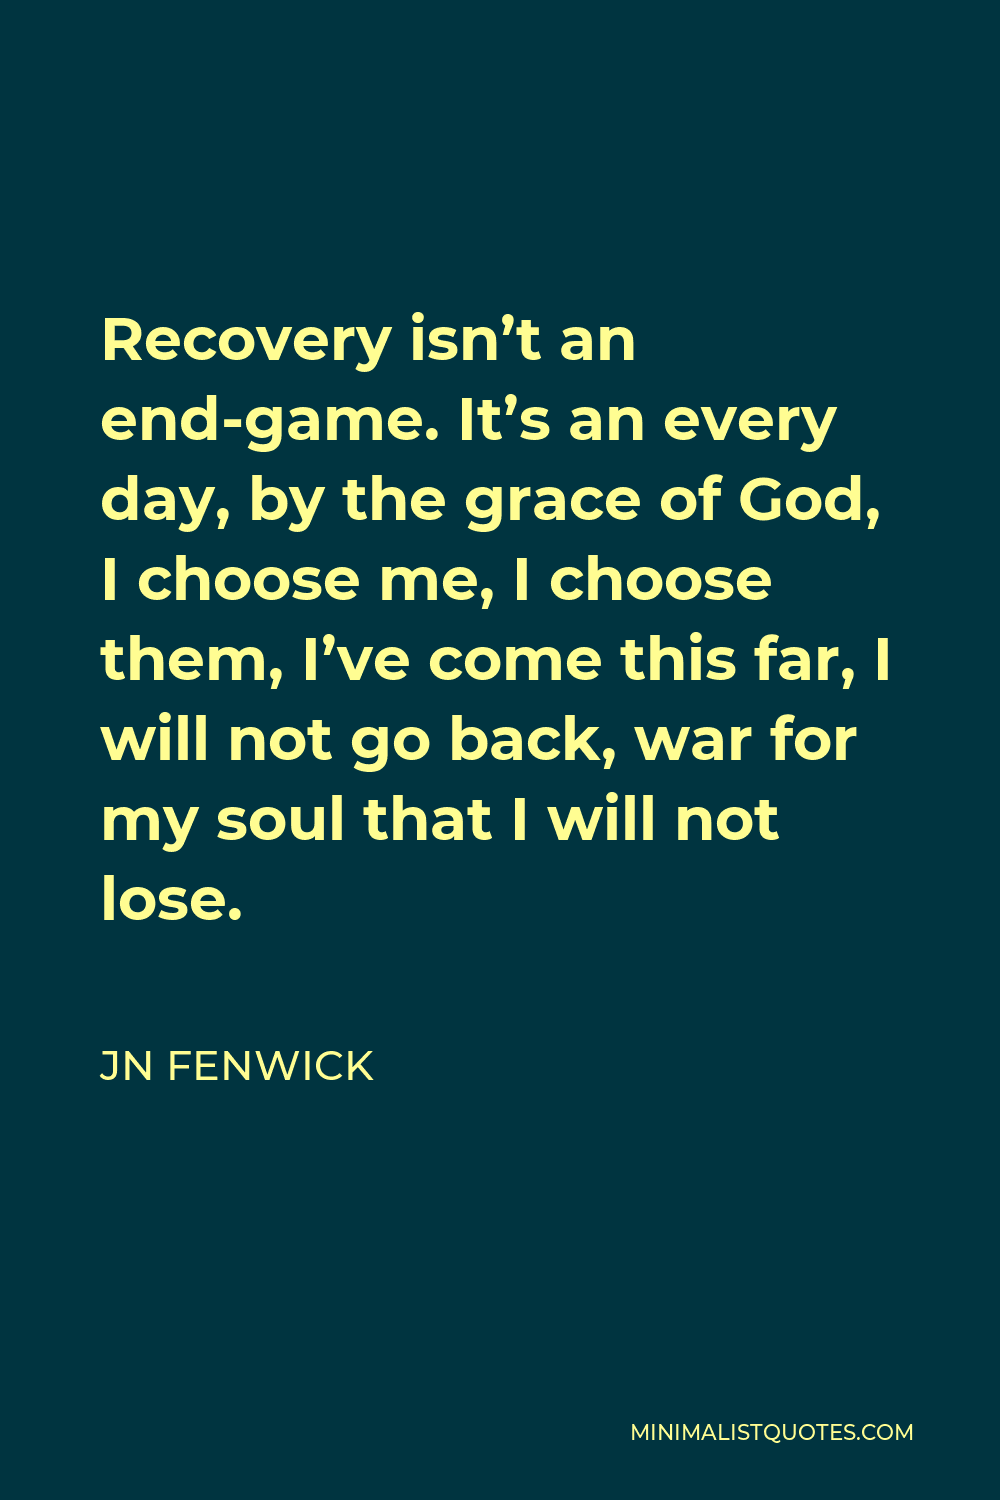 Jn Fenwick Quote Recovery Isn T An End Game It S An Every Day By The Grace Of God I Choose Me I Choose Them I Ve Come This Far I Will Not Go Back War